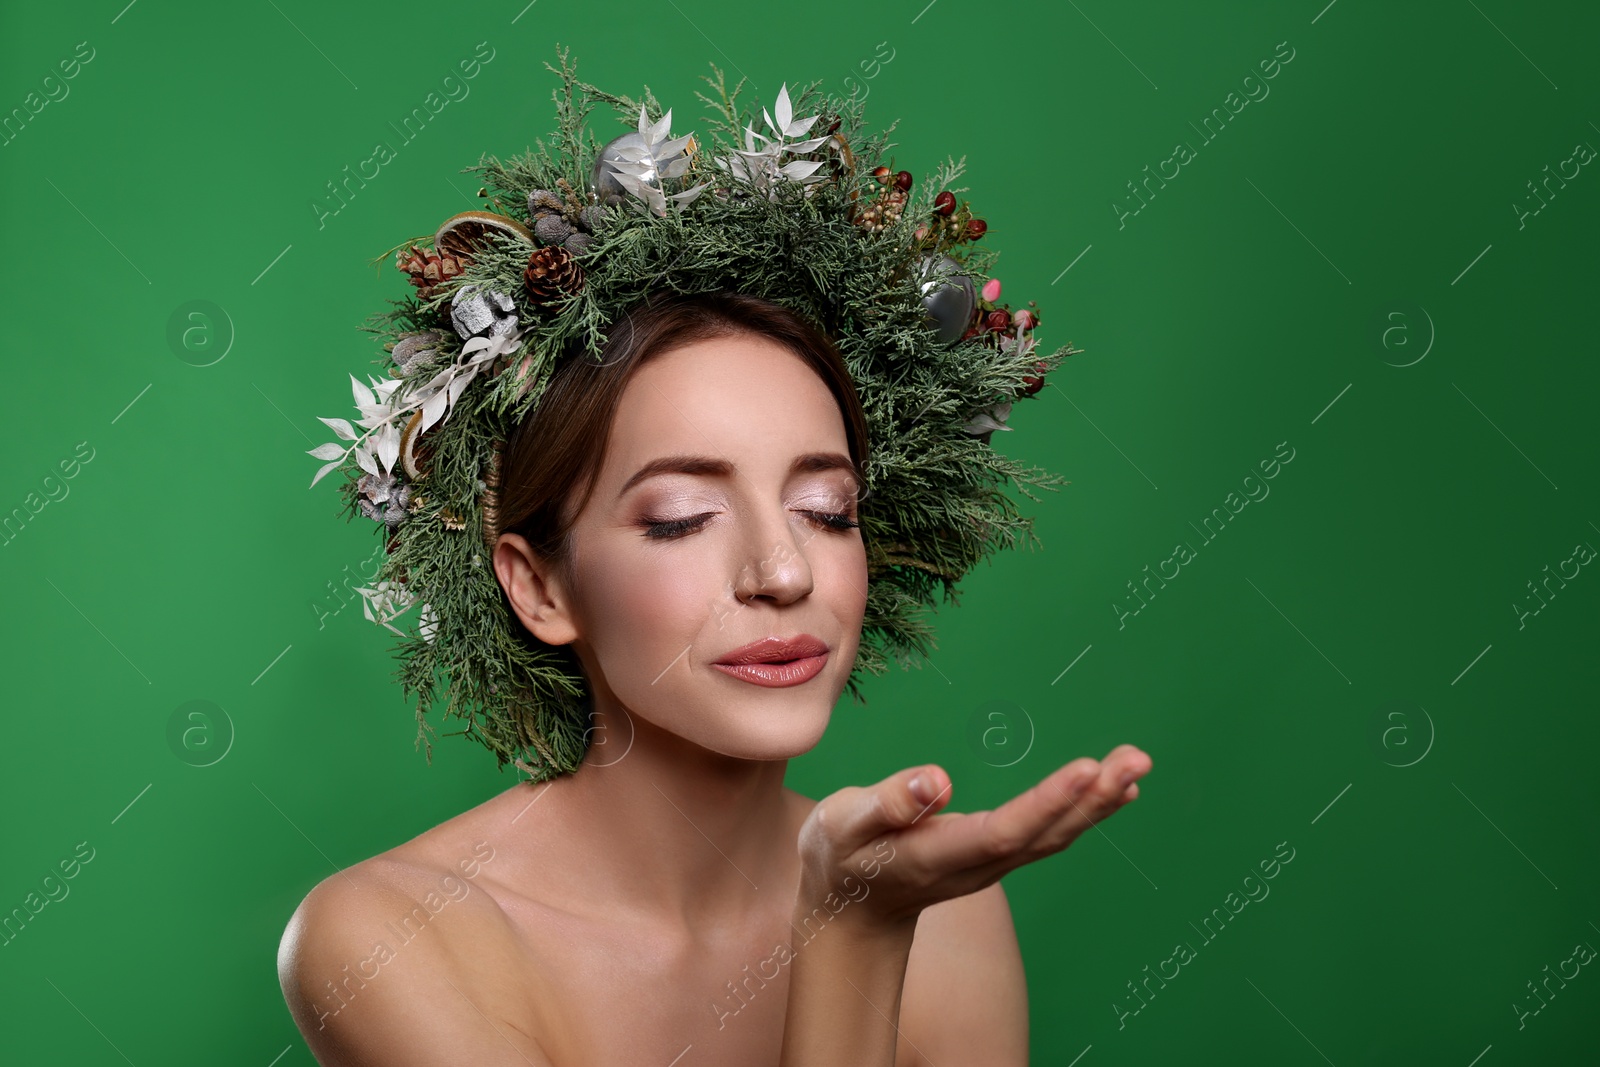 Photo of Beautiful young woman with Christmas wreath blowing kiss on green background